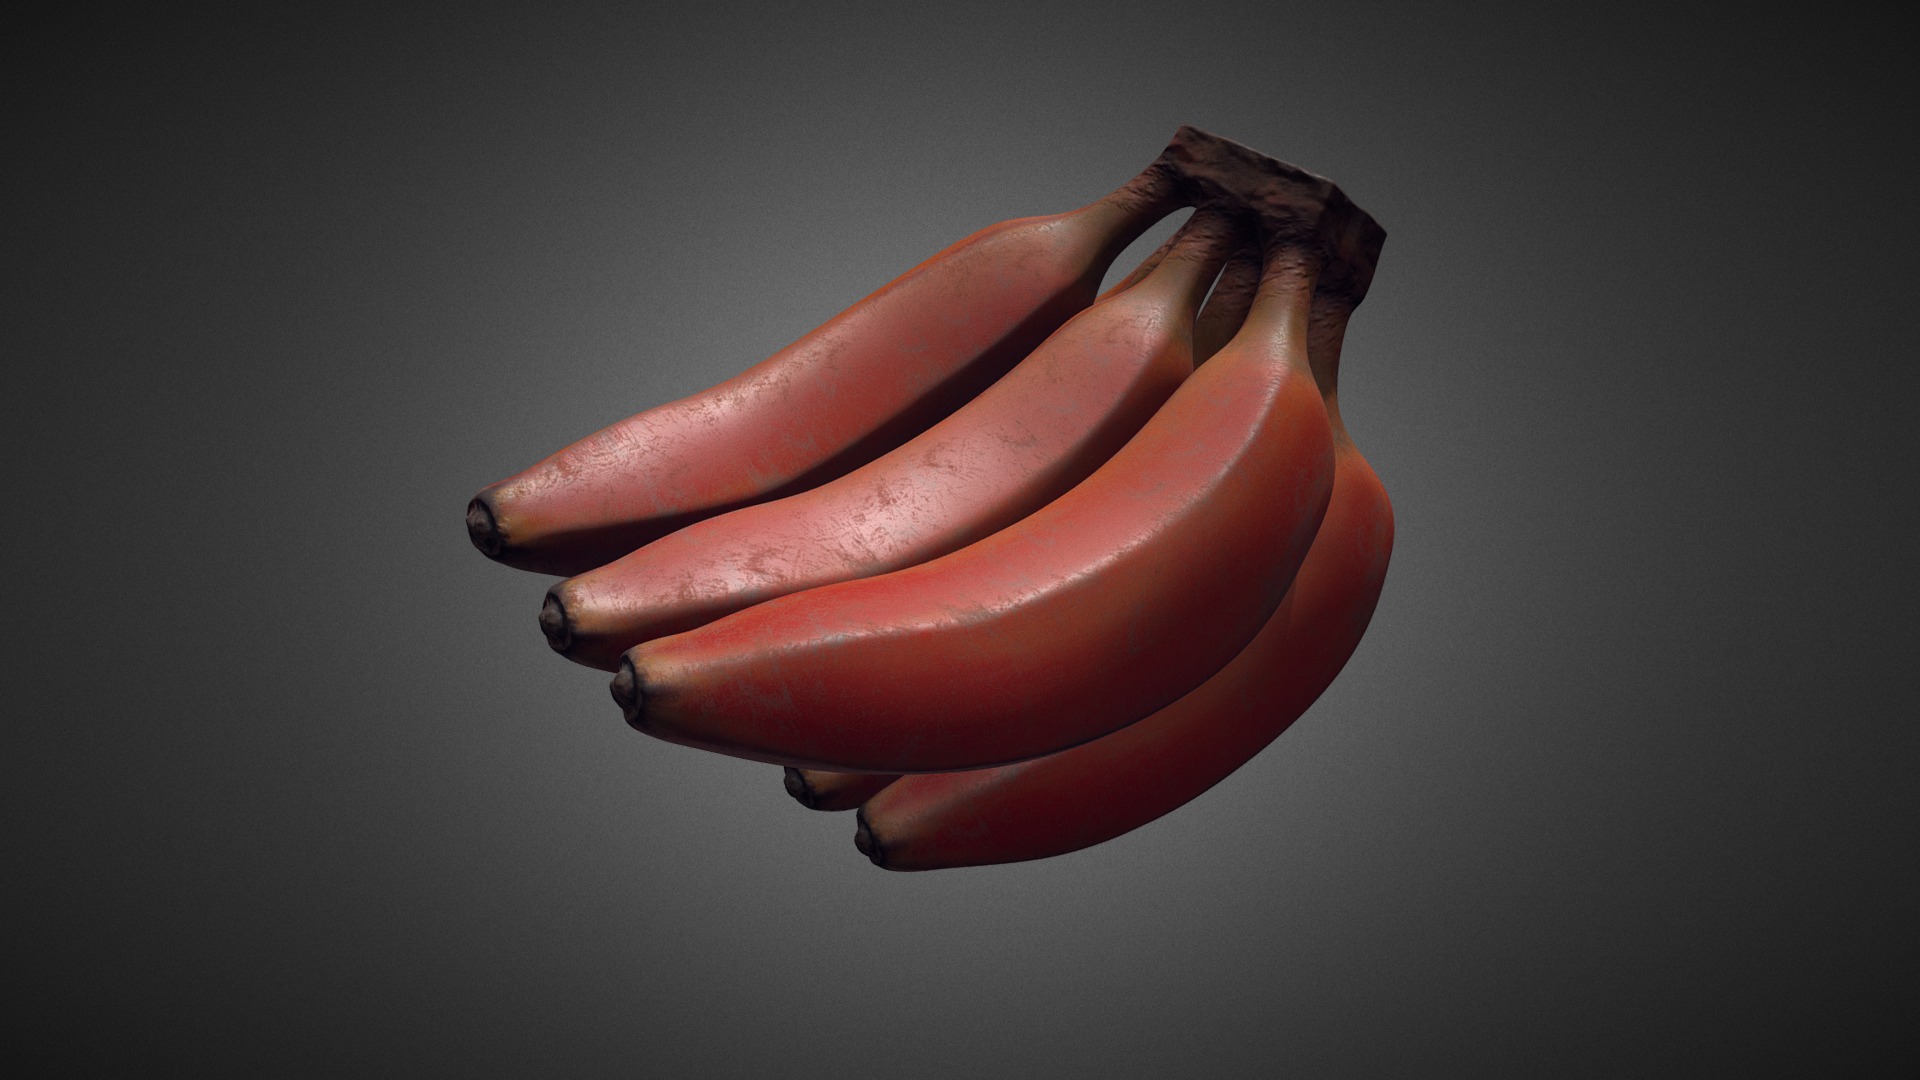 3D model Red Banana Bunch - This is a 3D model of the Red Banana Bunch. The 3D model is about a hand with a black glove.